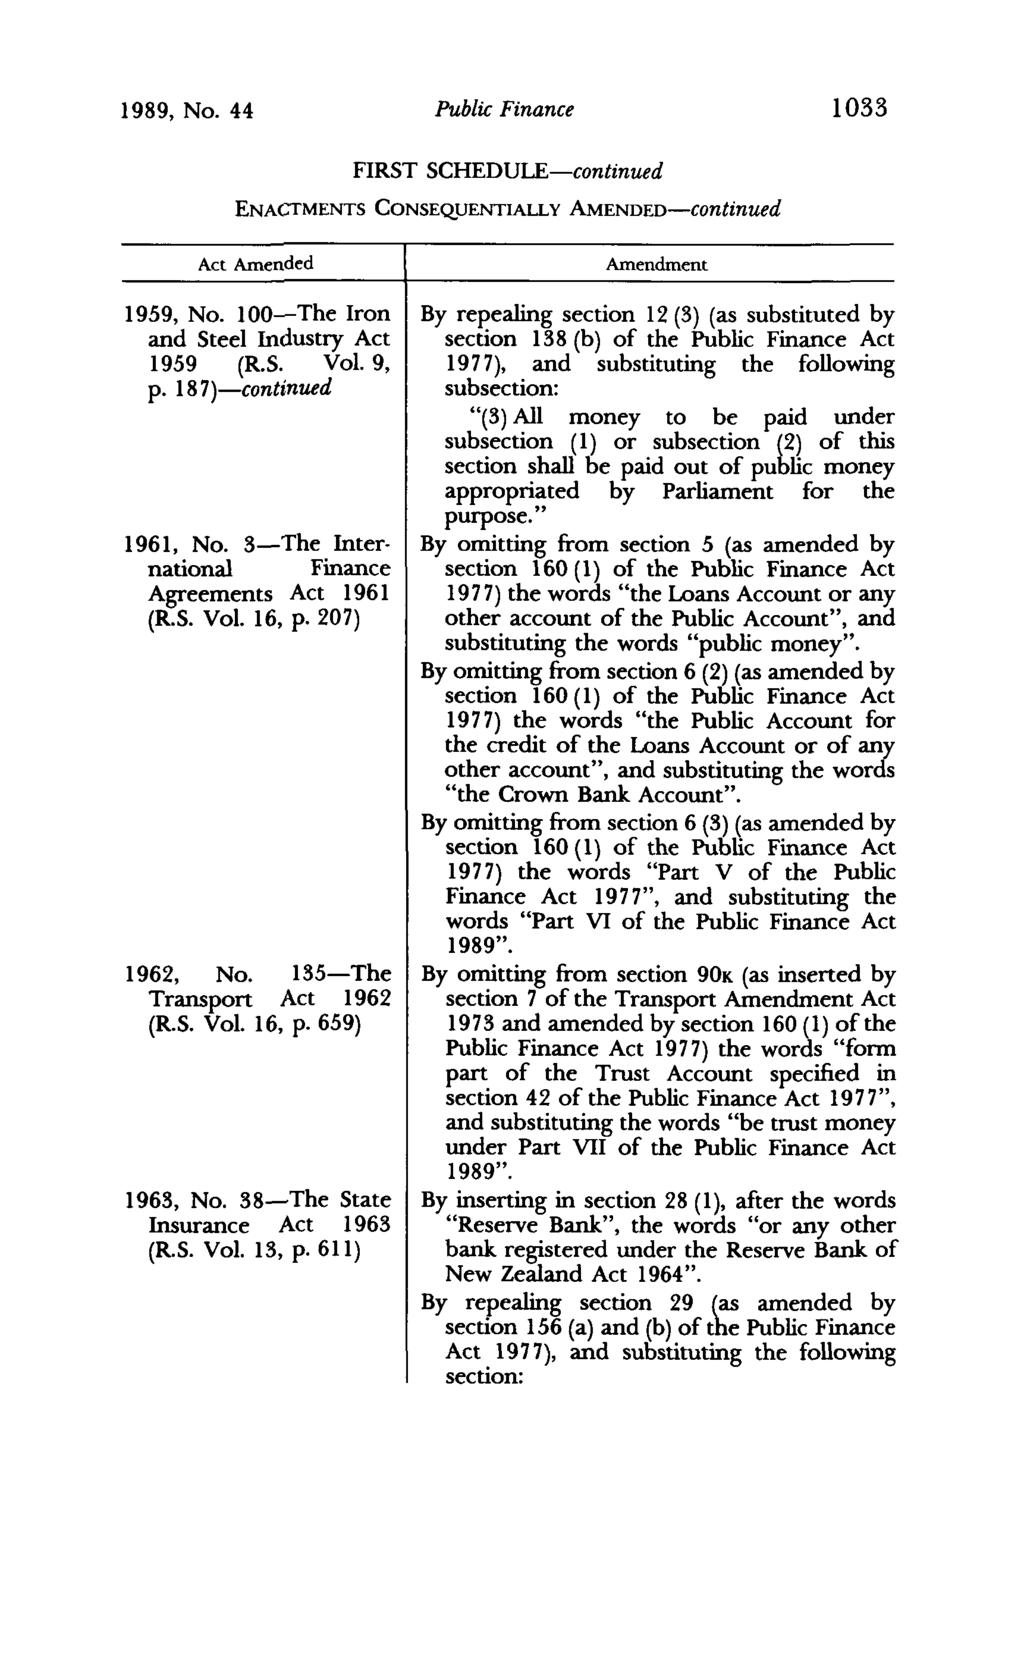 1989, No. 44 Public Finance 1033 FIRST SCHEDULE-continued ENACTMENTS CONSEQ.UENTIALL y AMENDED-continued Act Amended 1959, No. loo-the Iron and Steel Industry Act 1959 (R.S. Vol. 9, p.